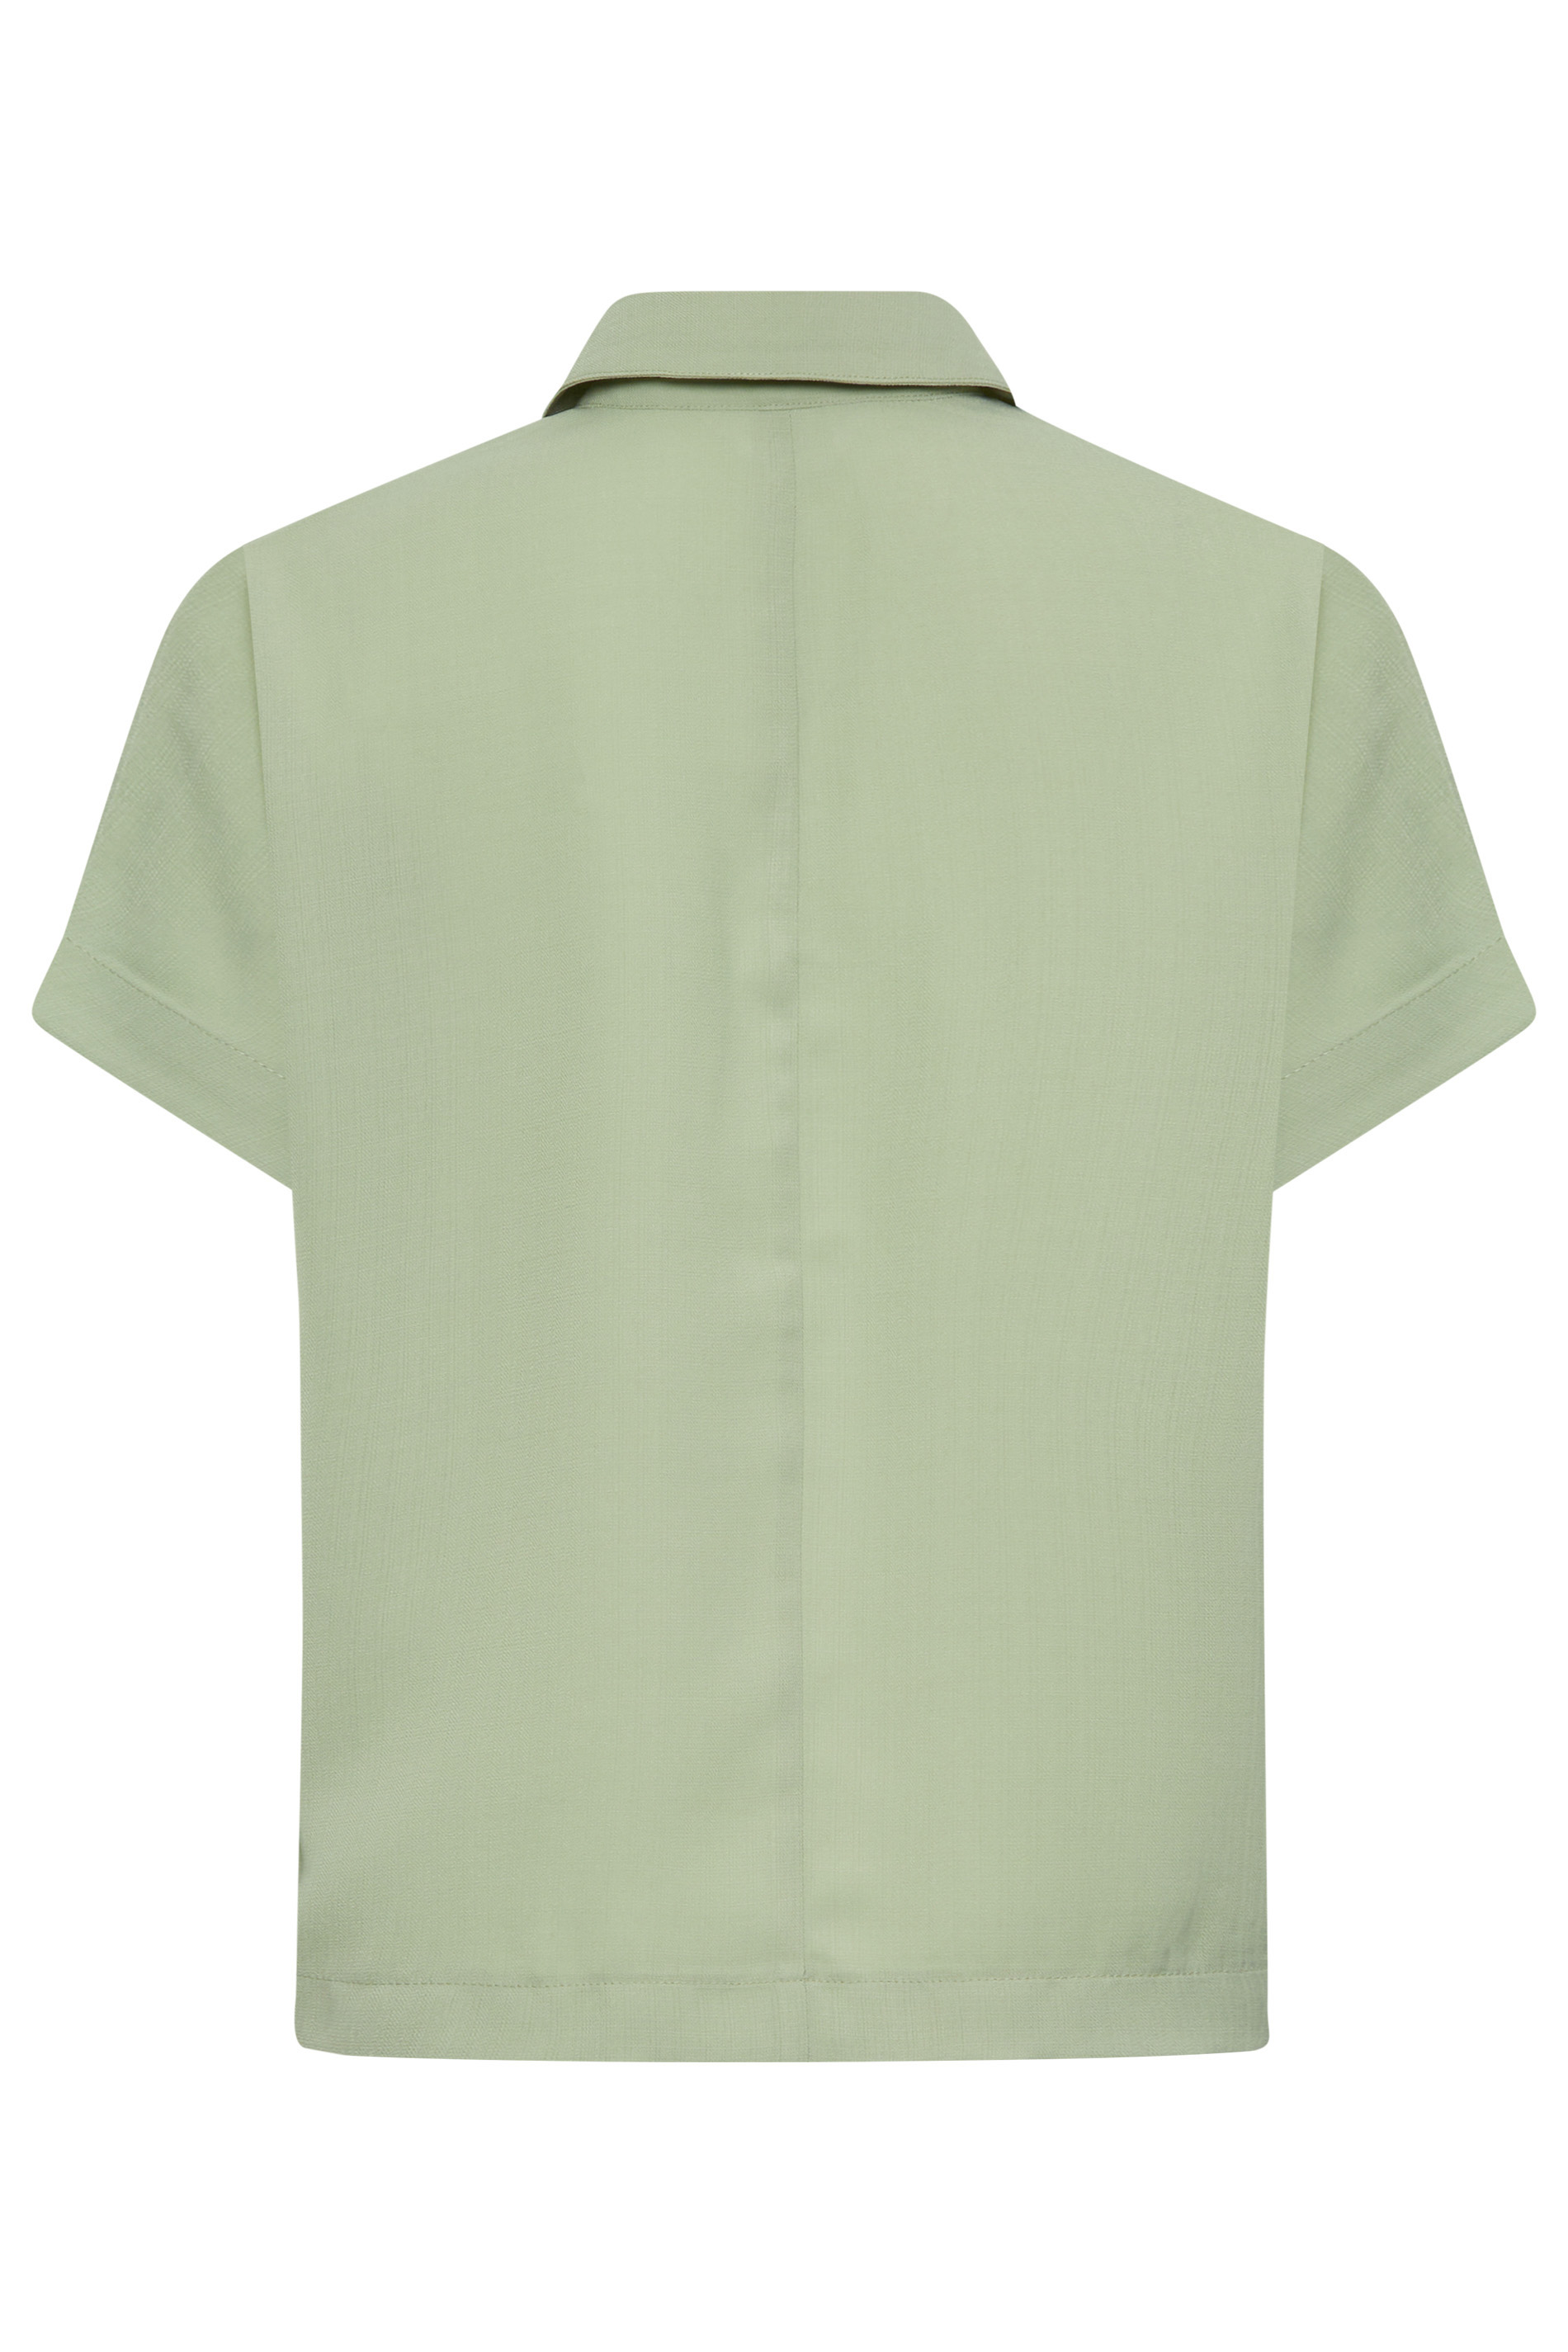 YOURS PETITE Plus Size Sage Green Utility Pocket Shirt | Yours Clothing 2